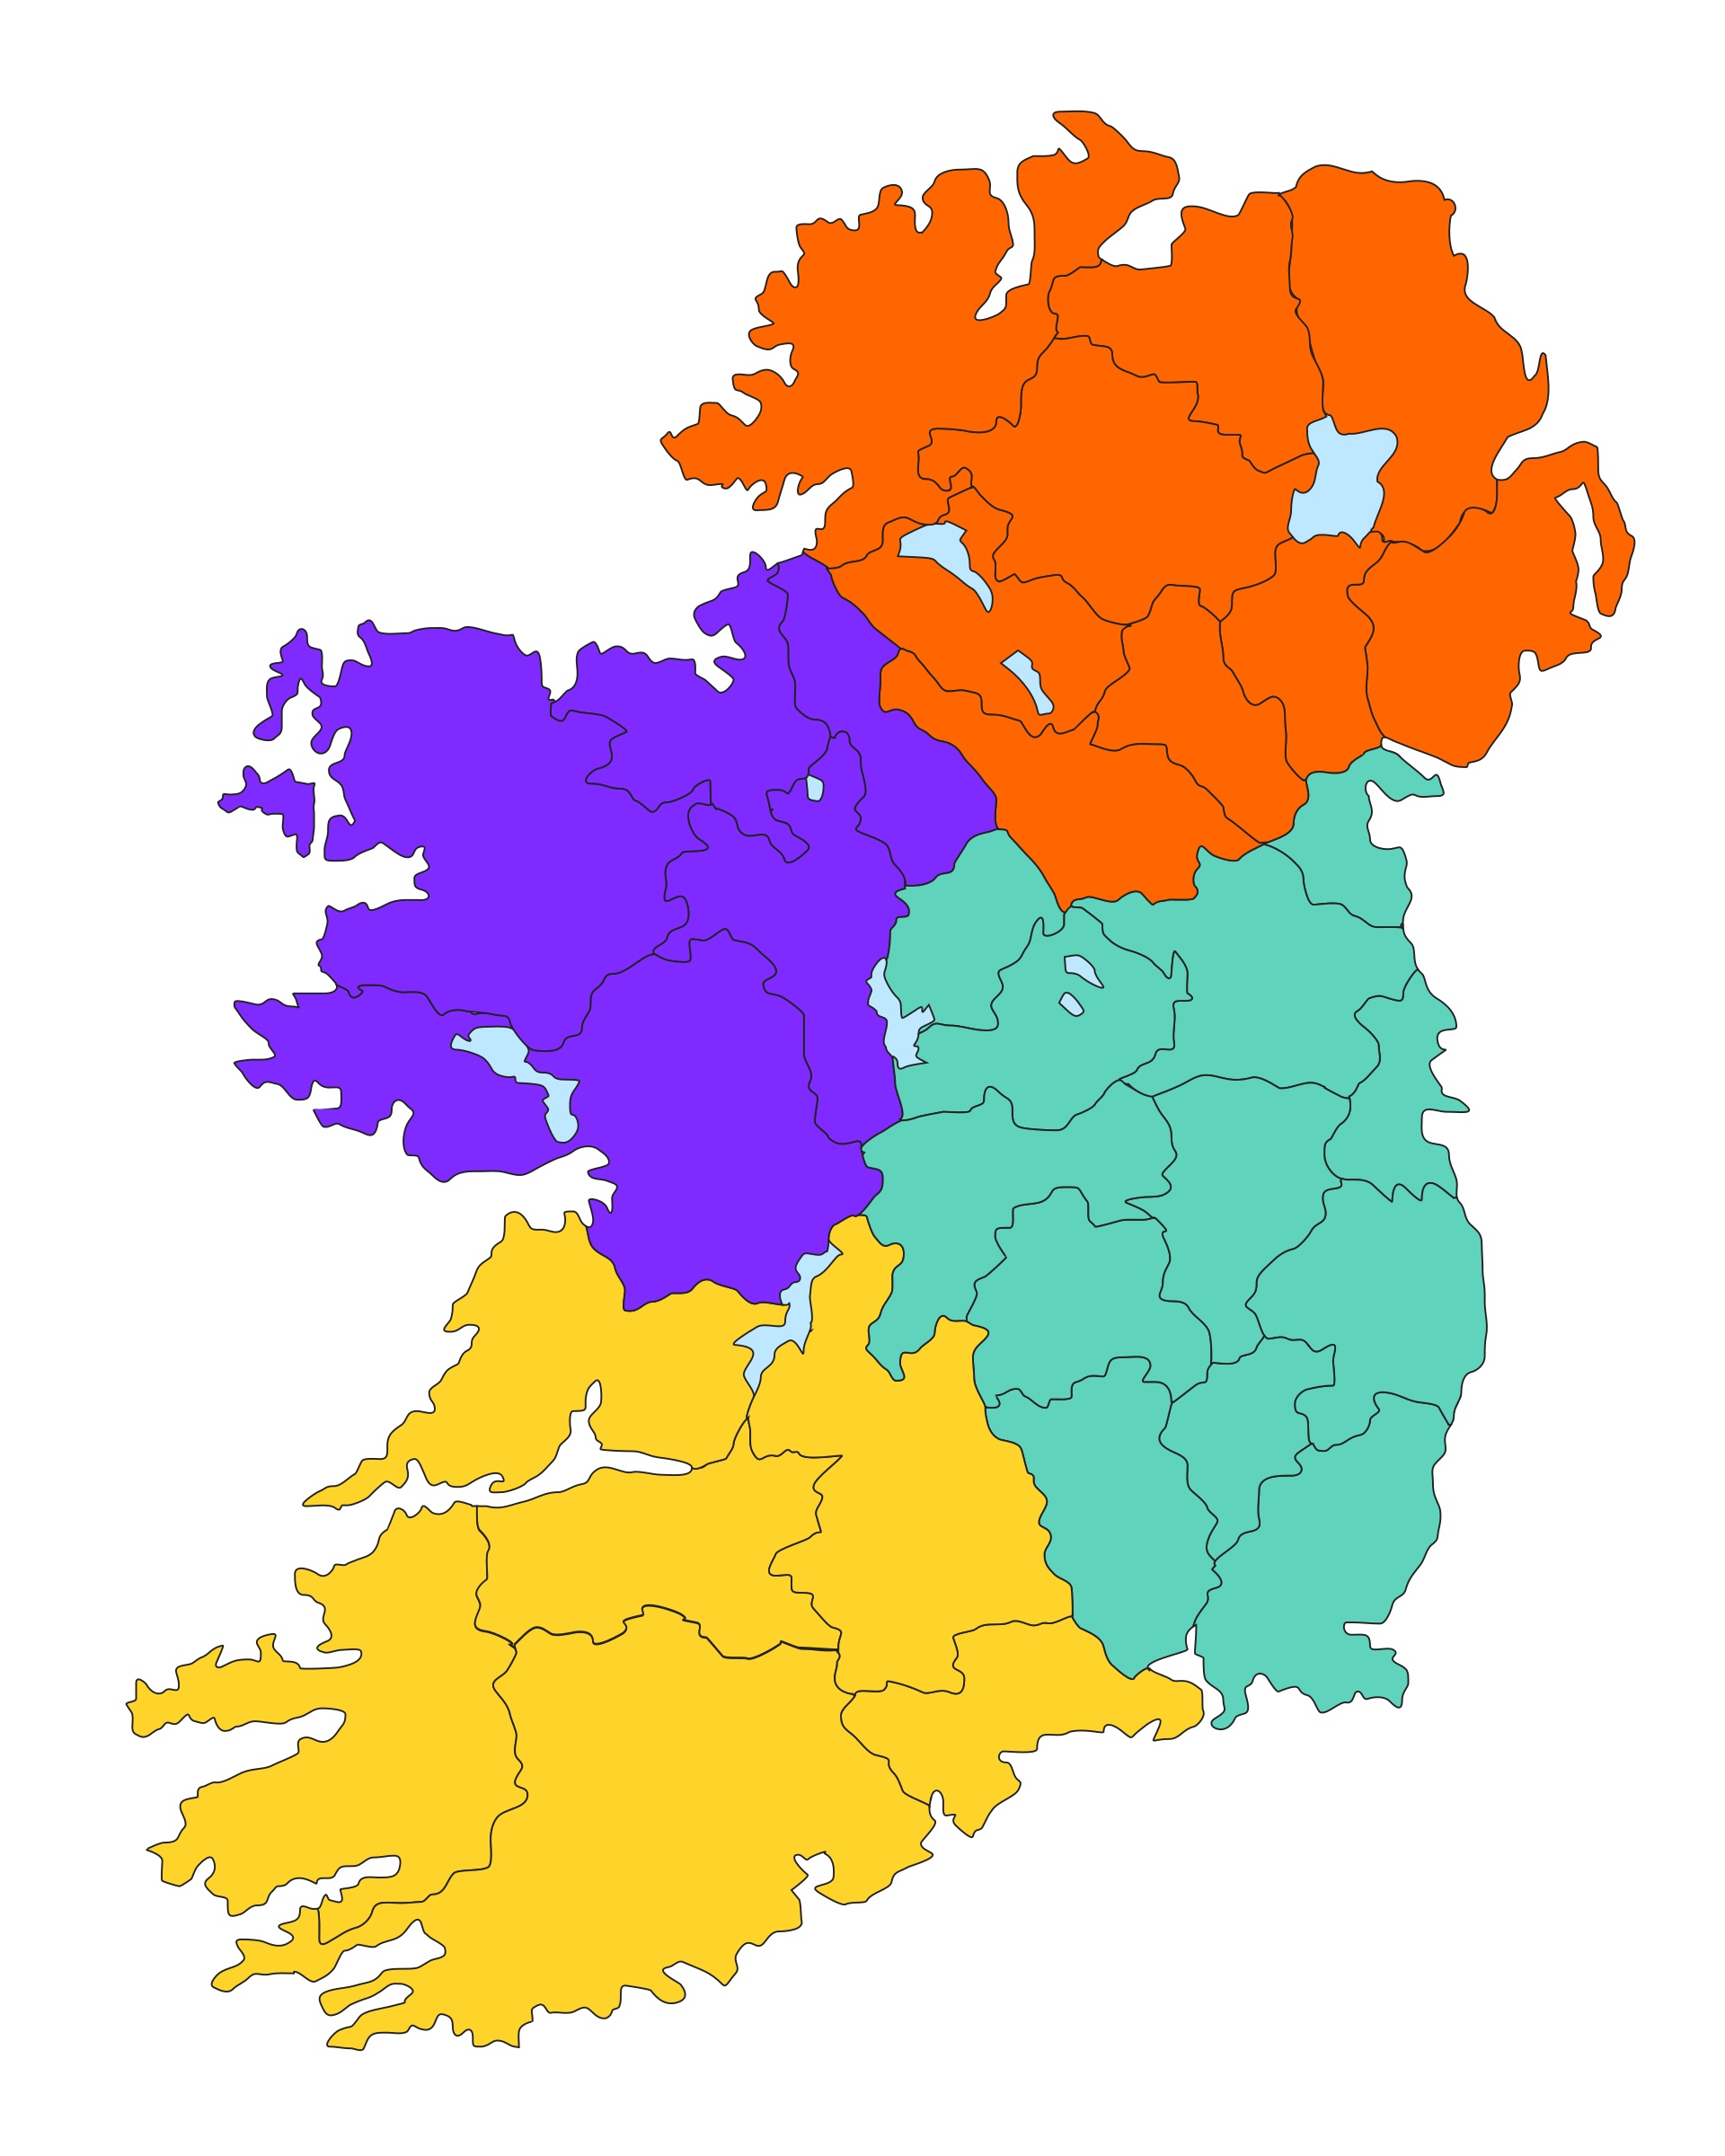 Map of four provinces of Ireland.